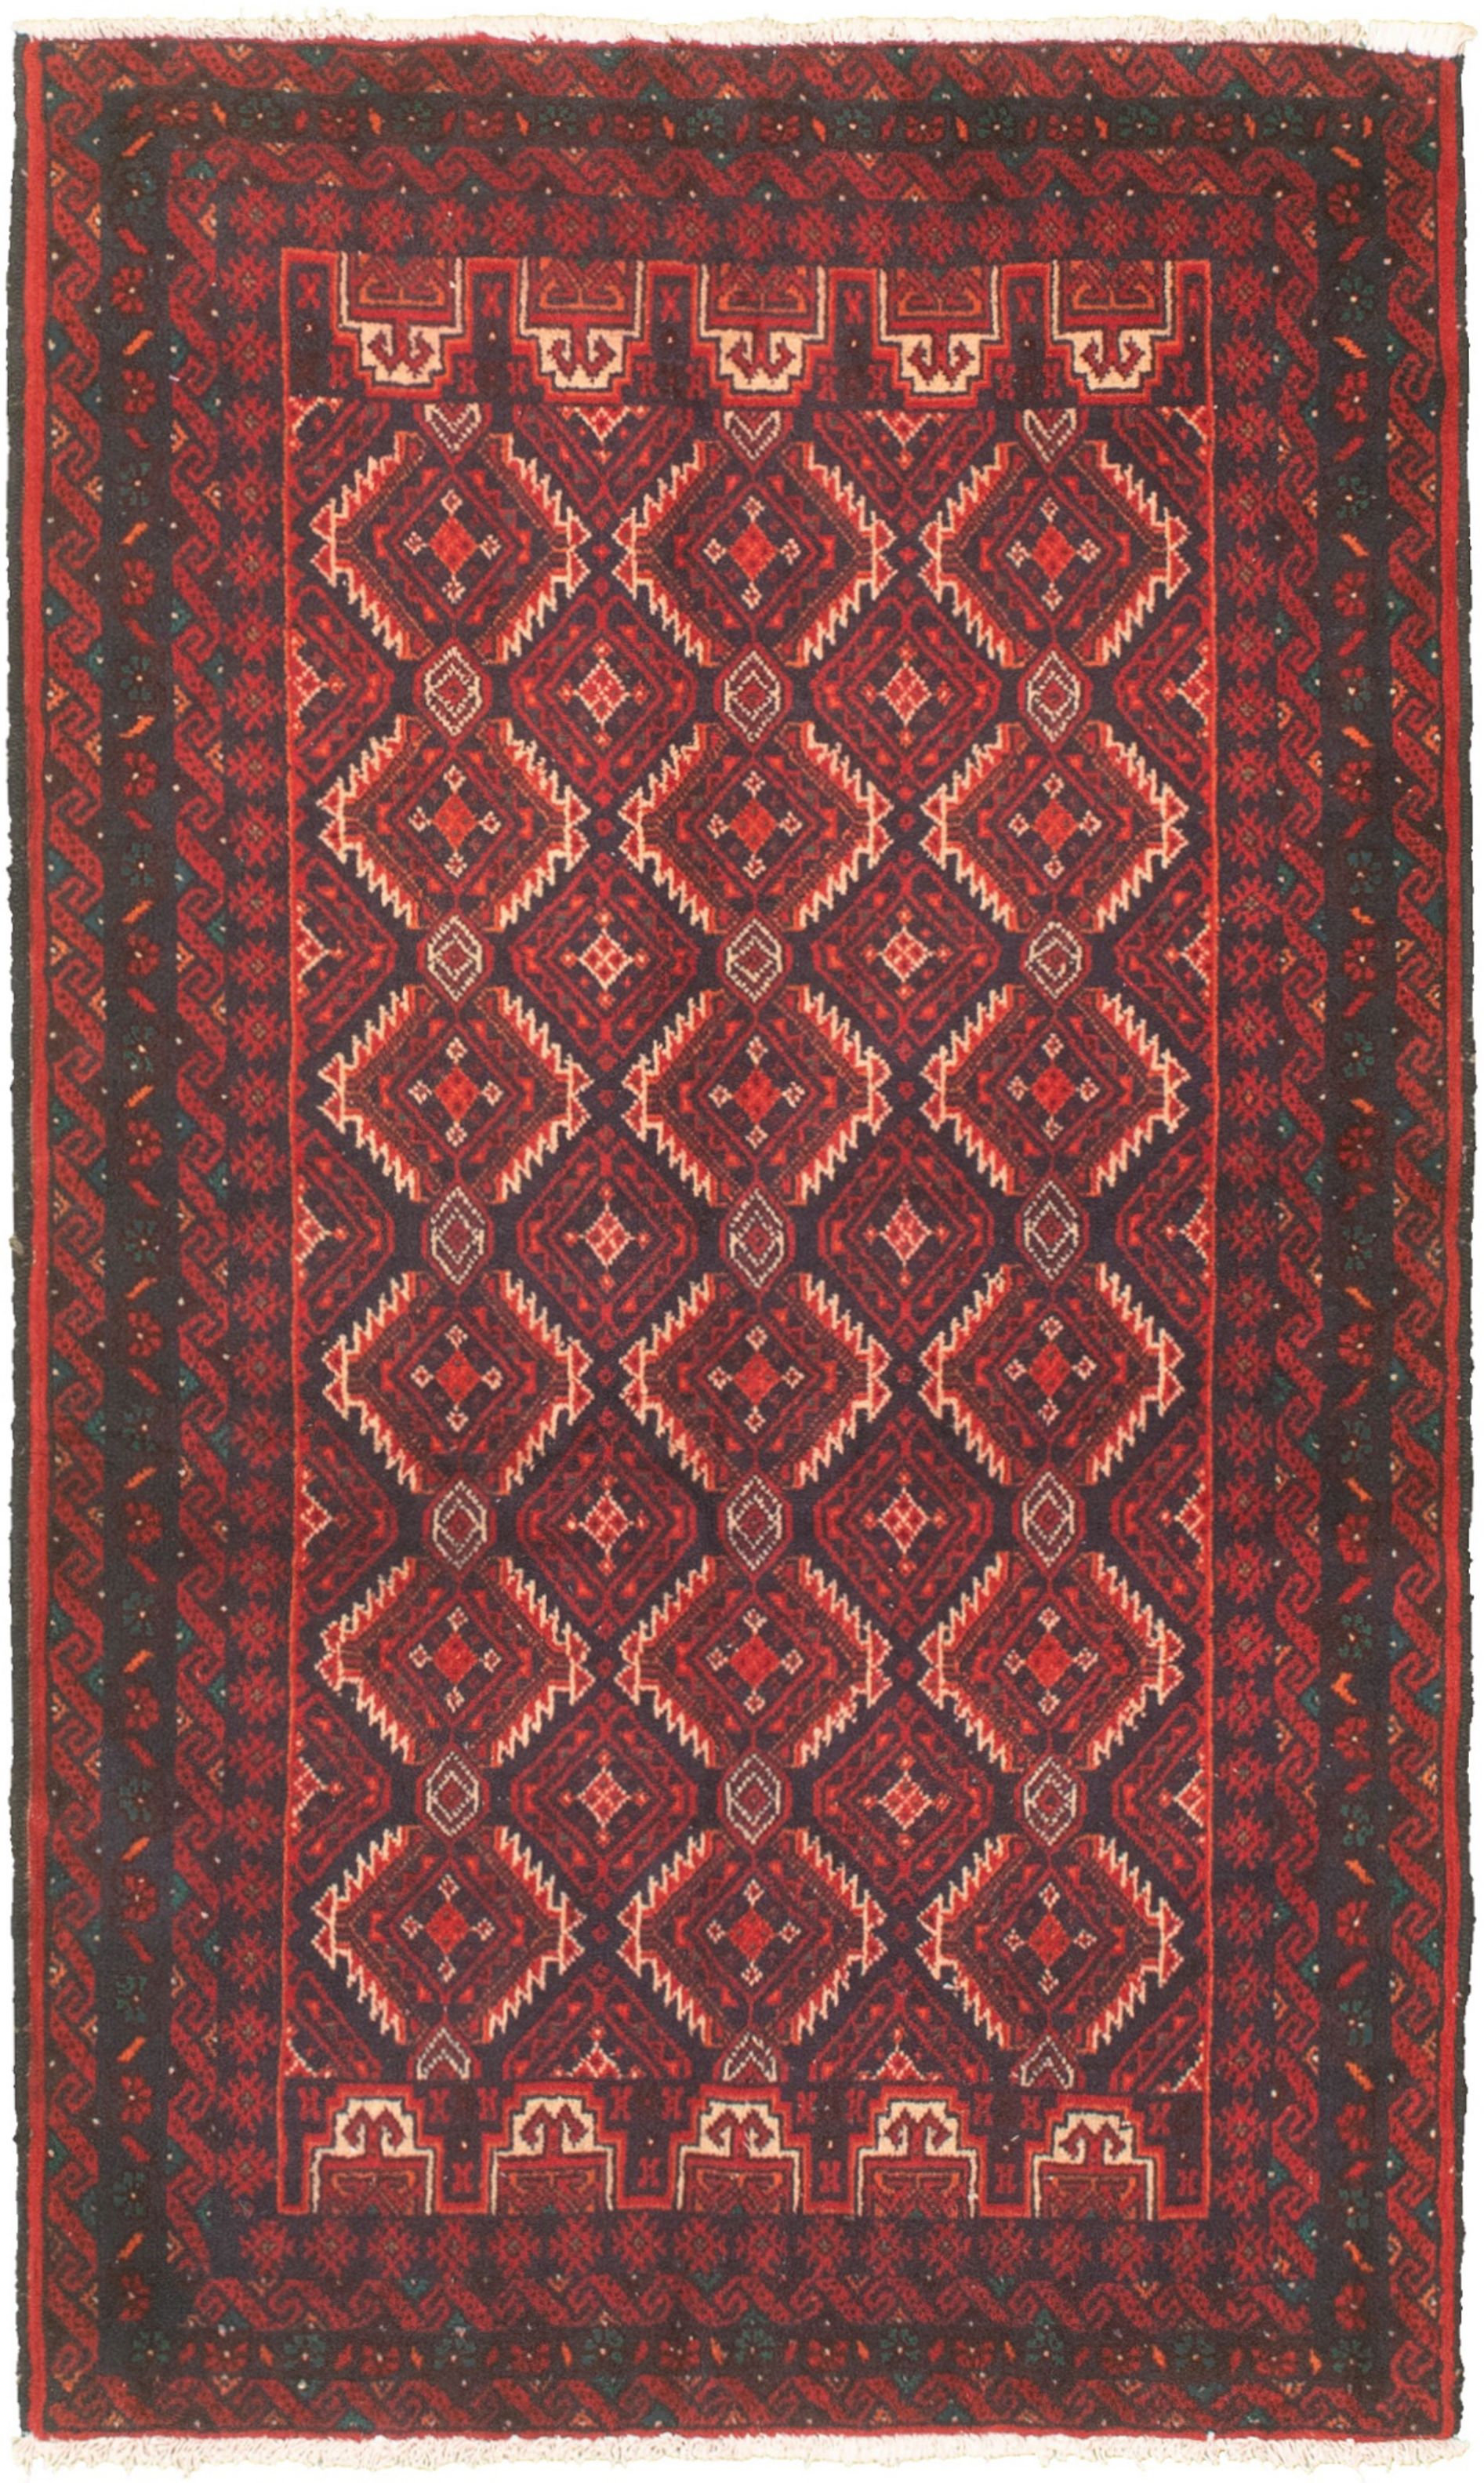 Hand-knotted Authentic Turkish Red Wool Rug 3'2" x 5'3" Size: 3'2" x 5'3"  